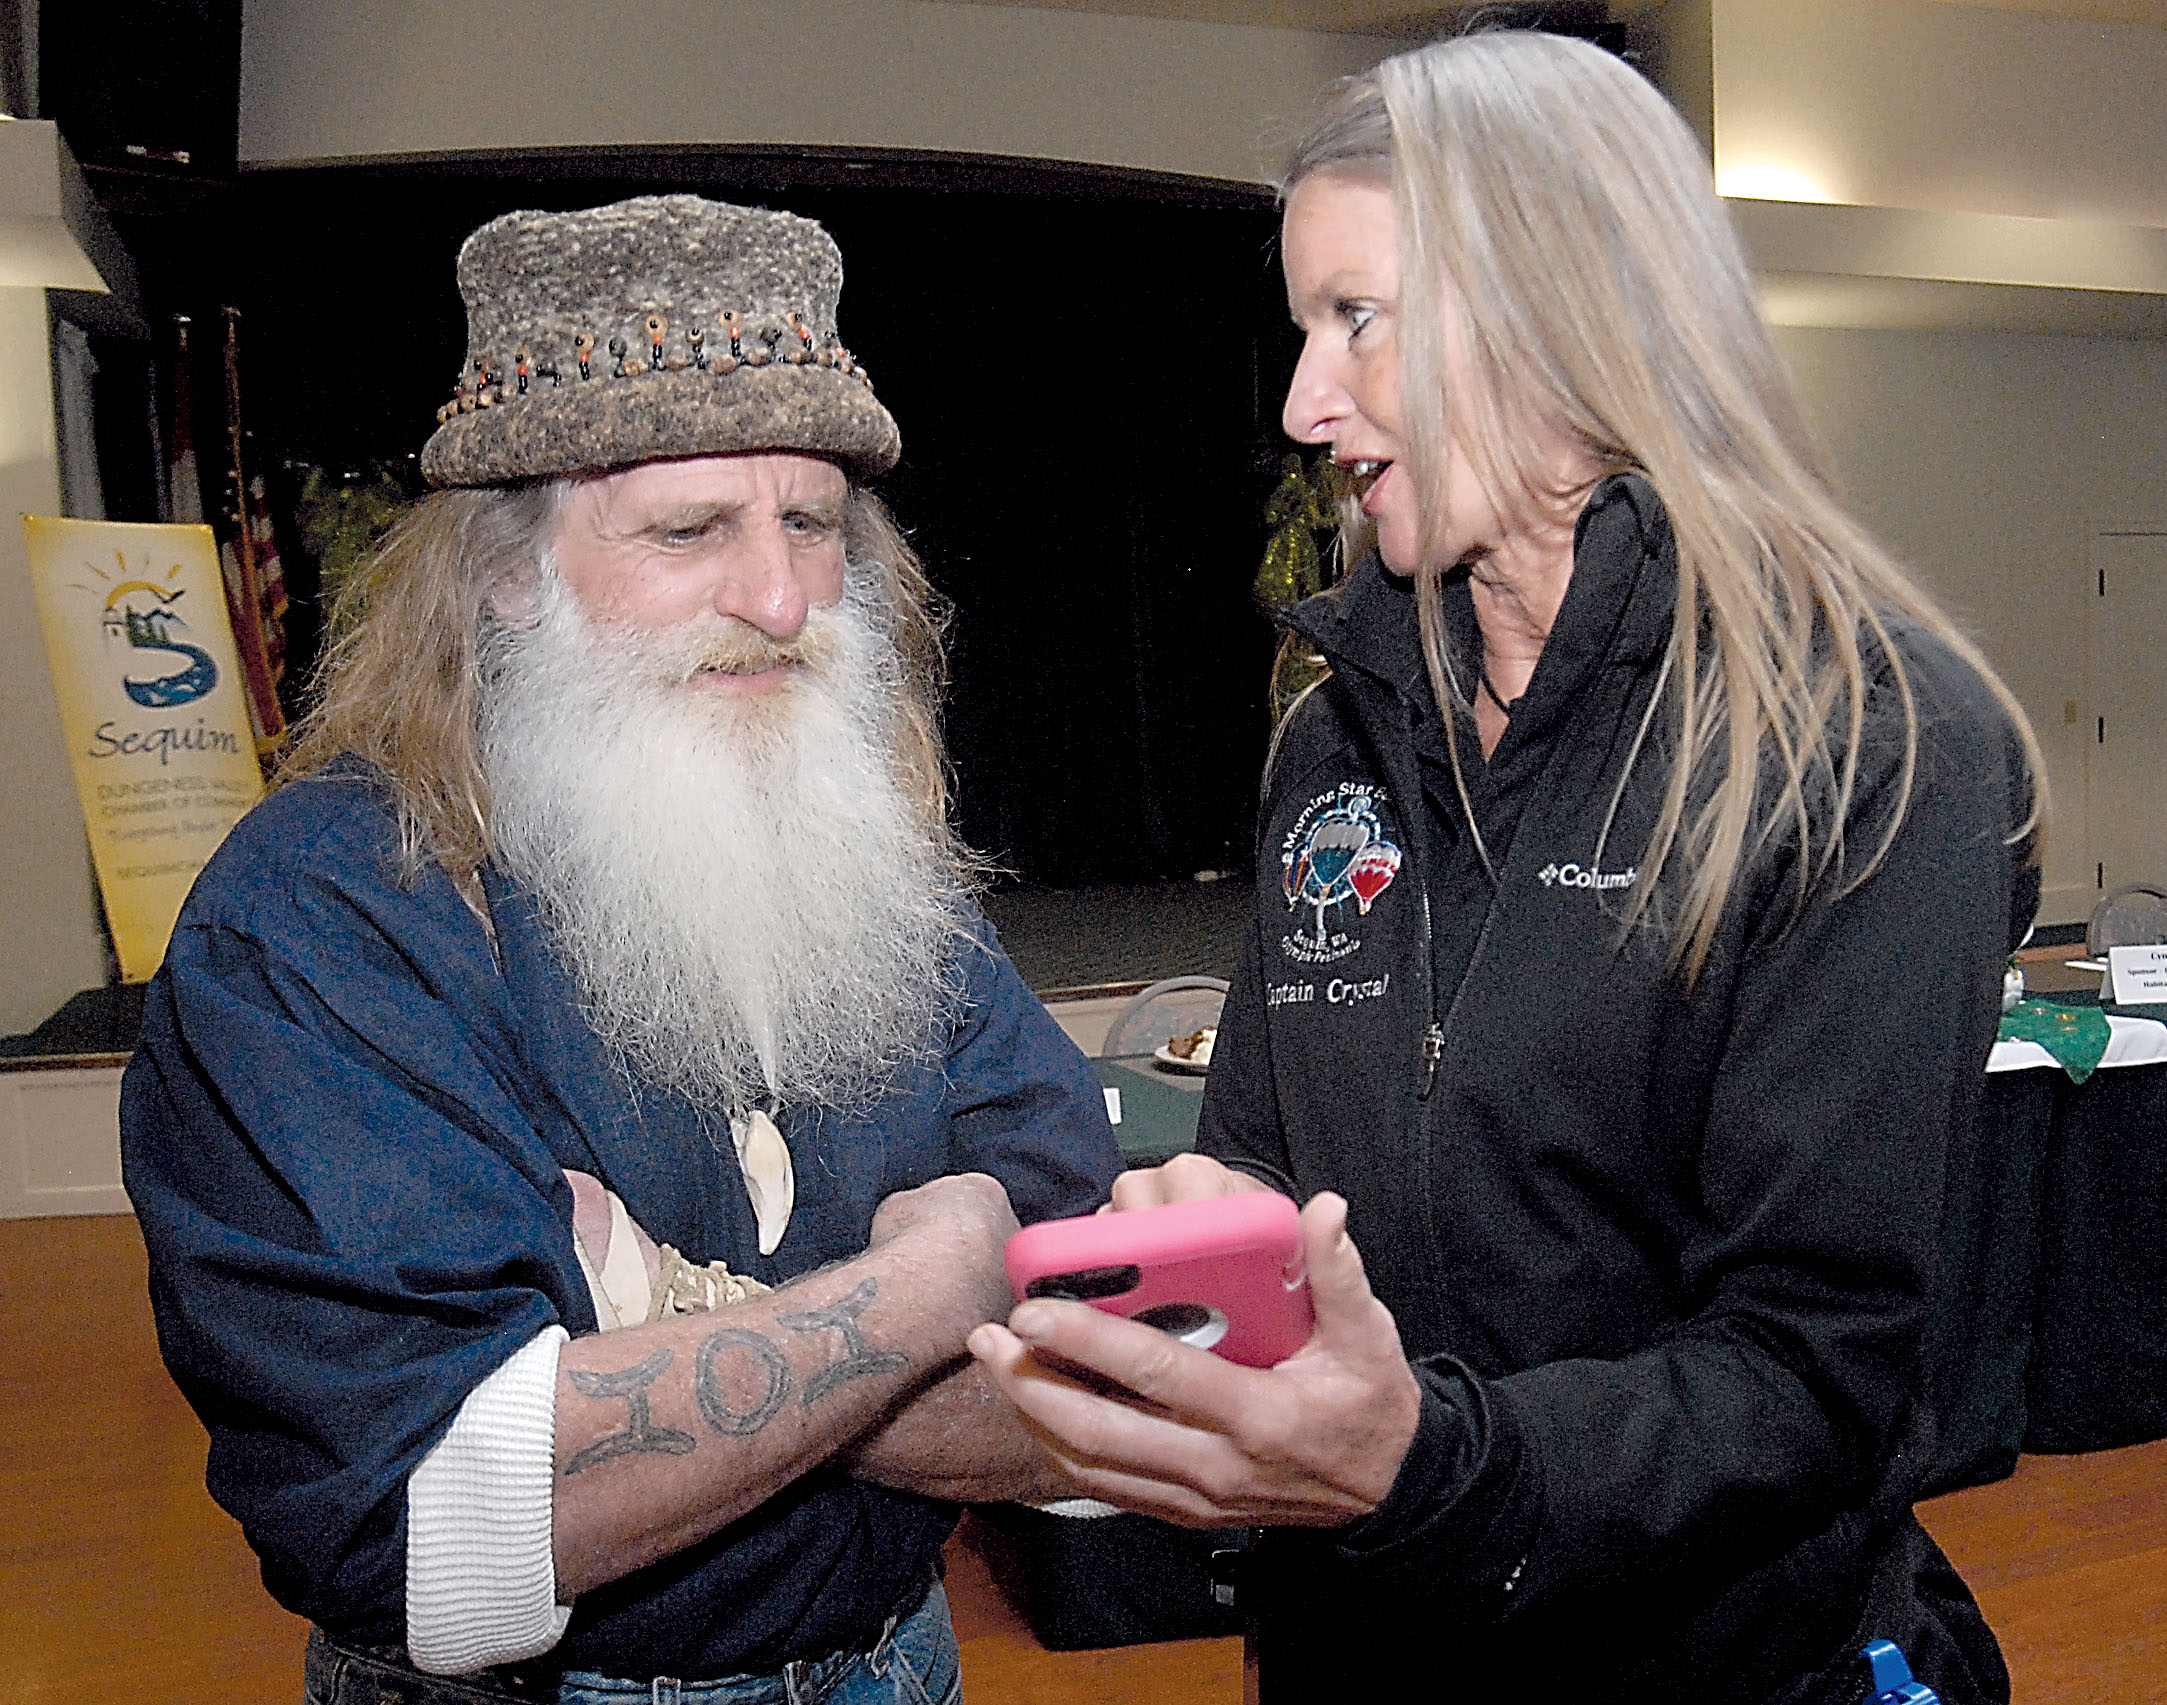 Reality television star Mick Dodge looks at photos on a cellphone Tuesday with pilot Crystal Stout of Sequim-based Morning Star Balloon Co. — Keith Thorpe/Peninsula Daily News ()